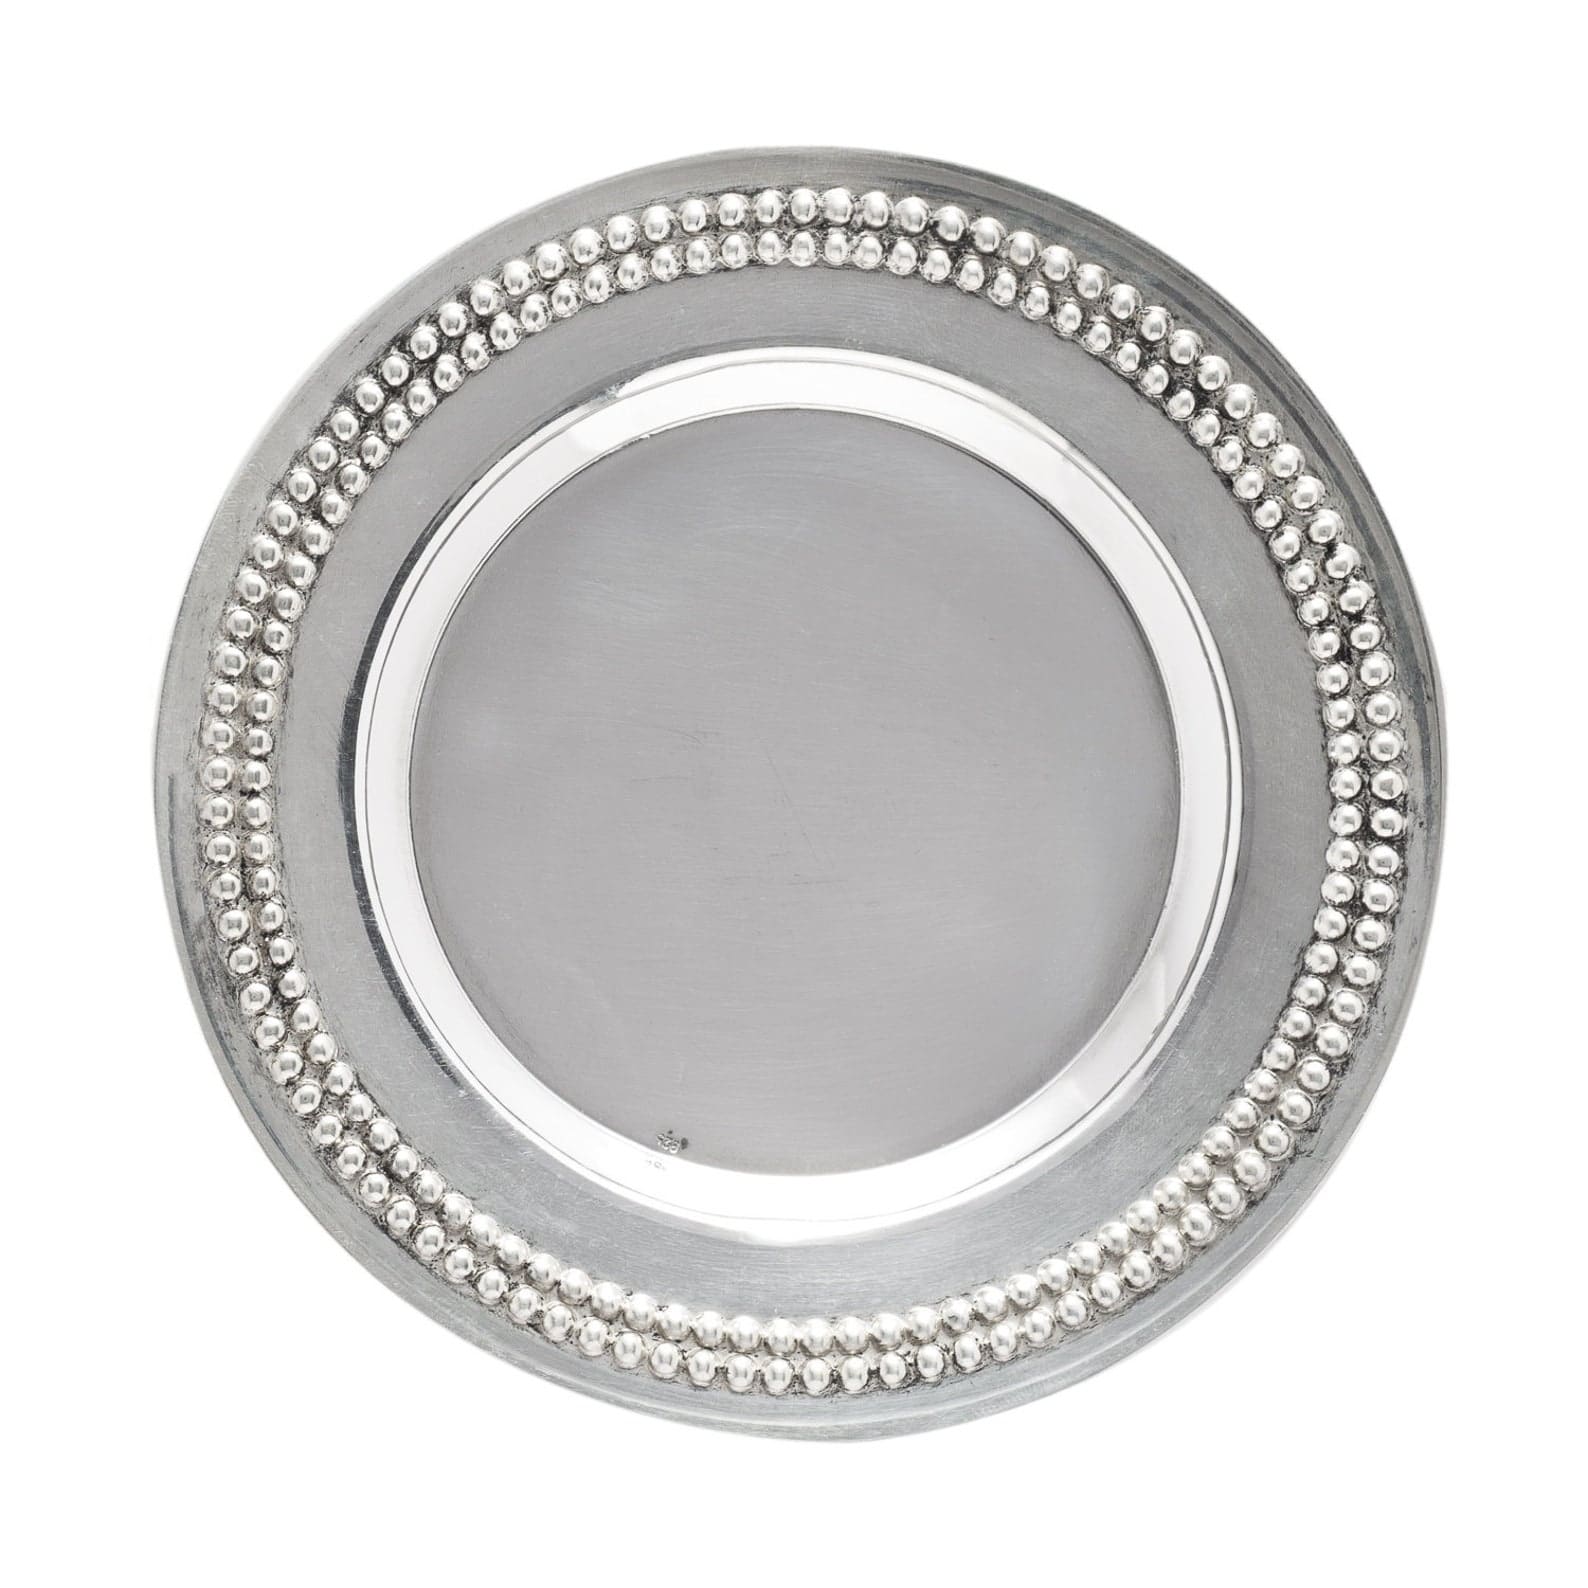 Stunning Sterling Silver Kiddush Cup Plate